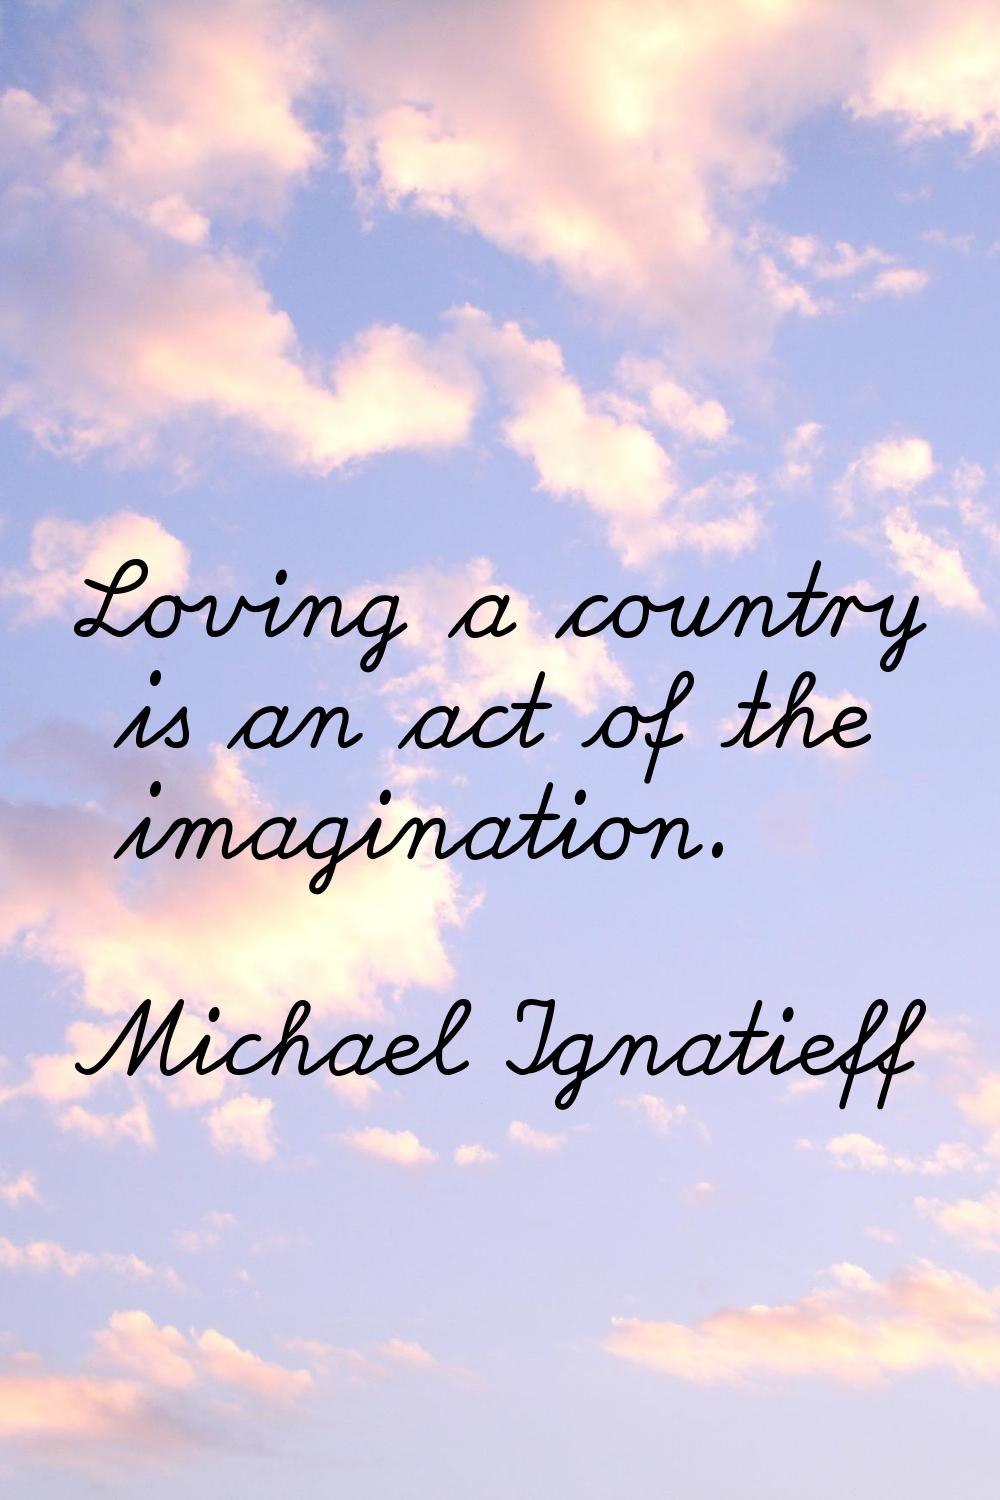 Loving a country is an act of the imagination.